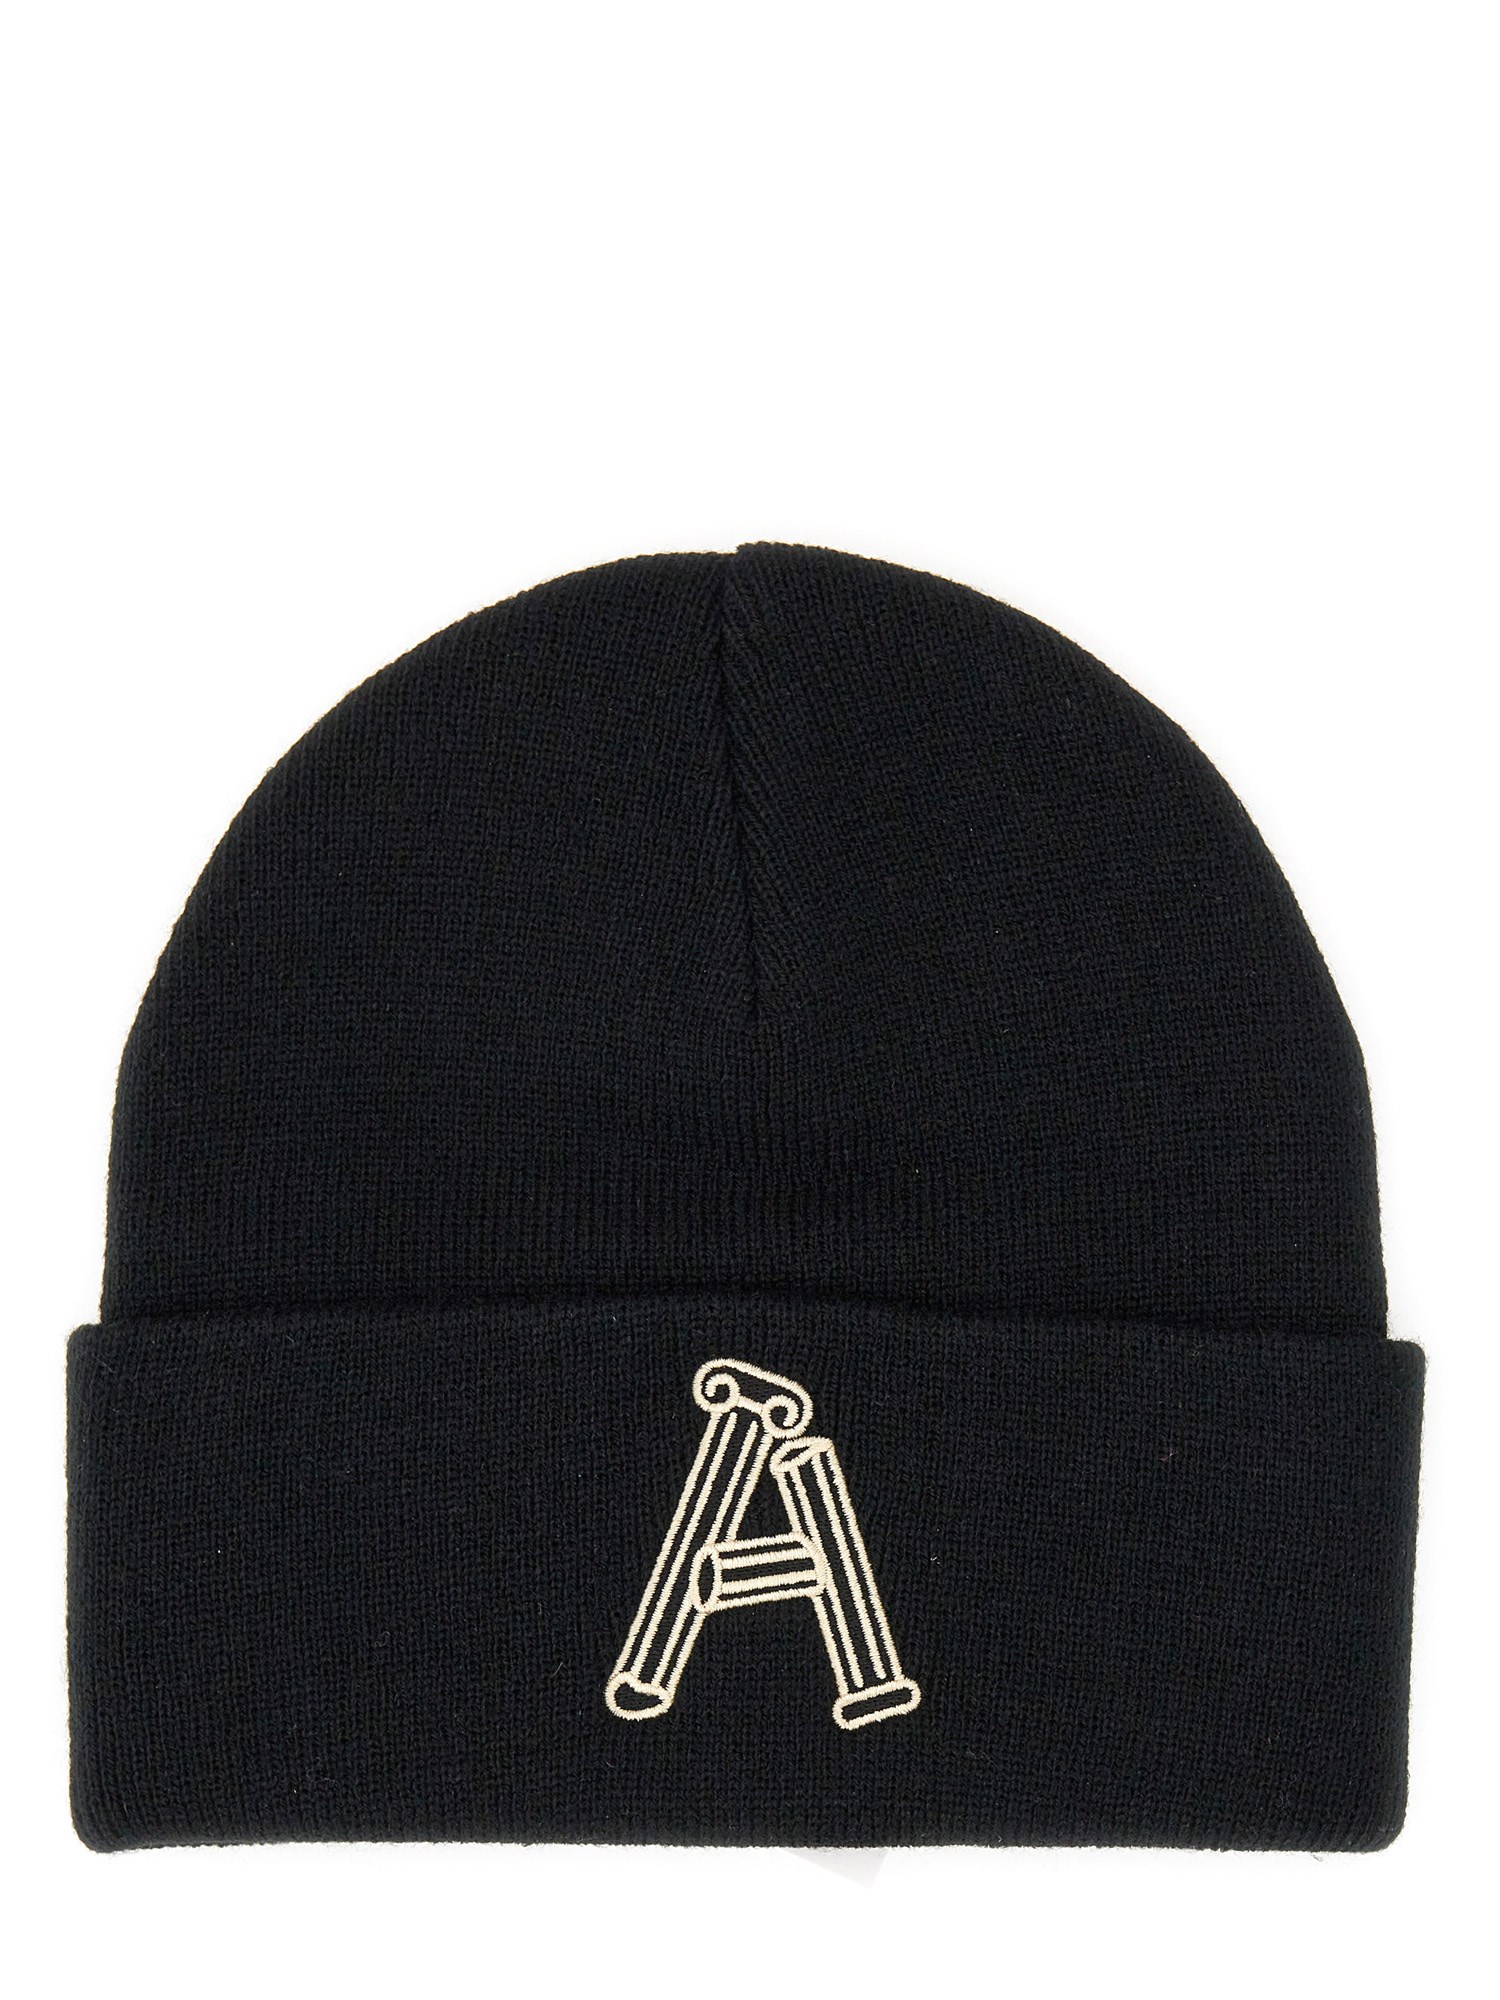 Aries aries hat with logo